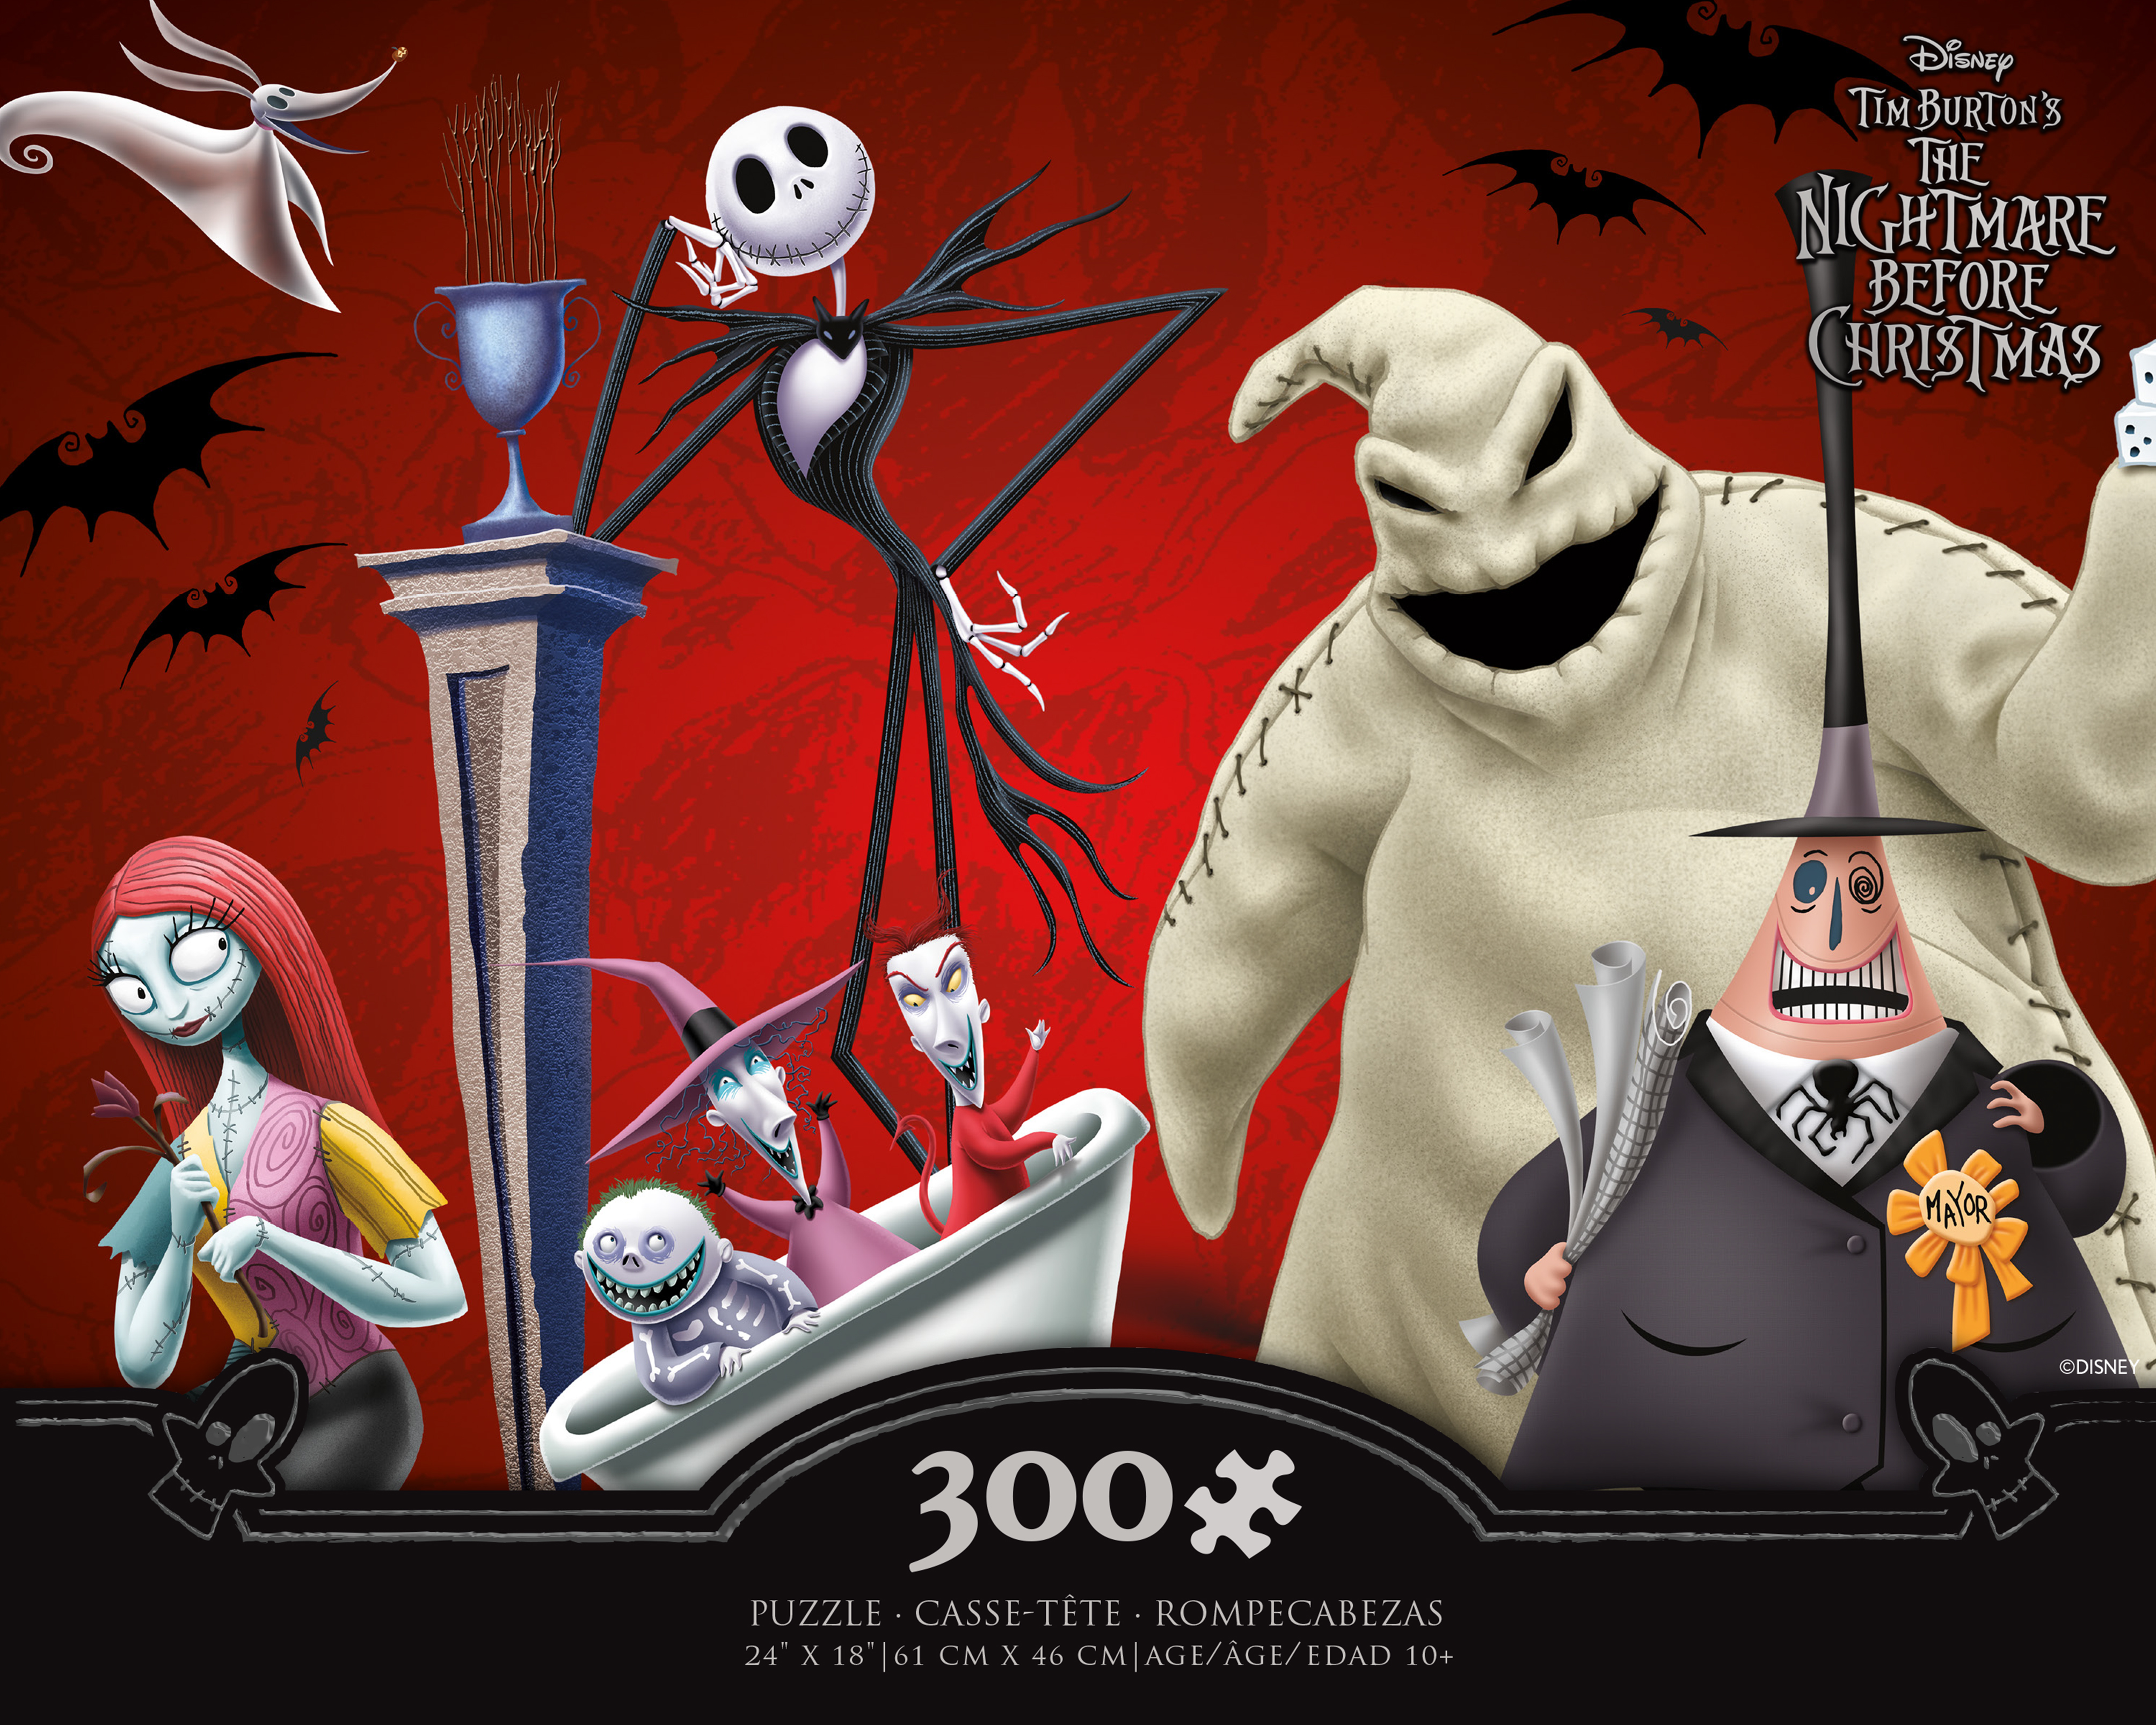 Ceaco - The Nightmare Before Christmas - Oogie Boogie Bash - 300 Piece Jigsaw Puzzle